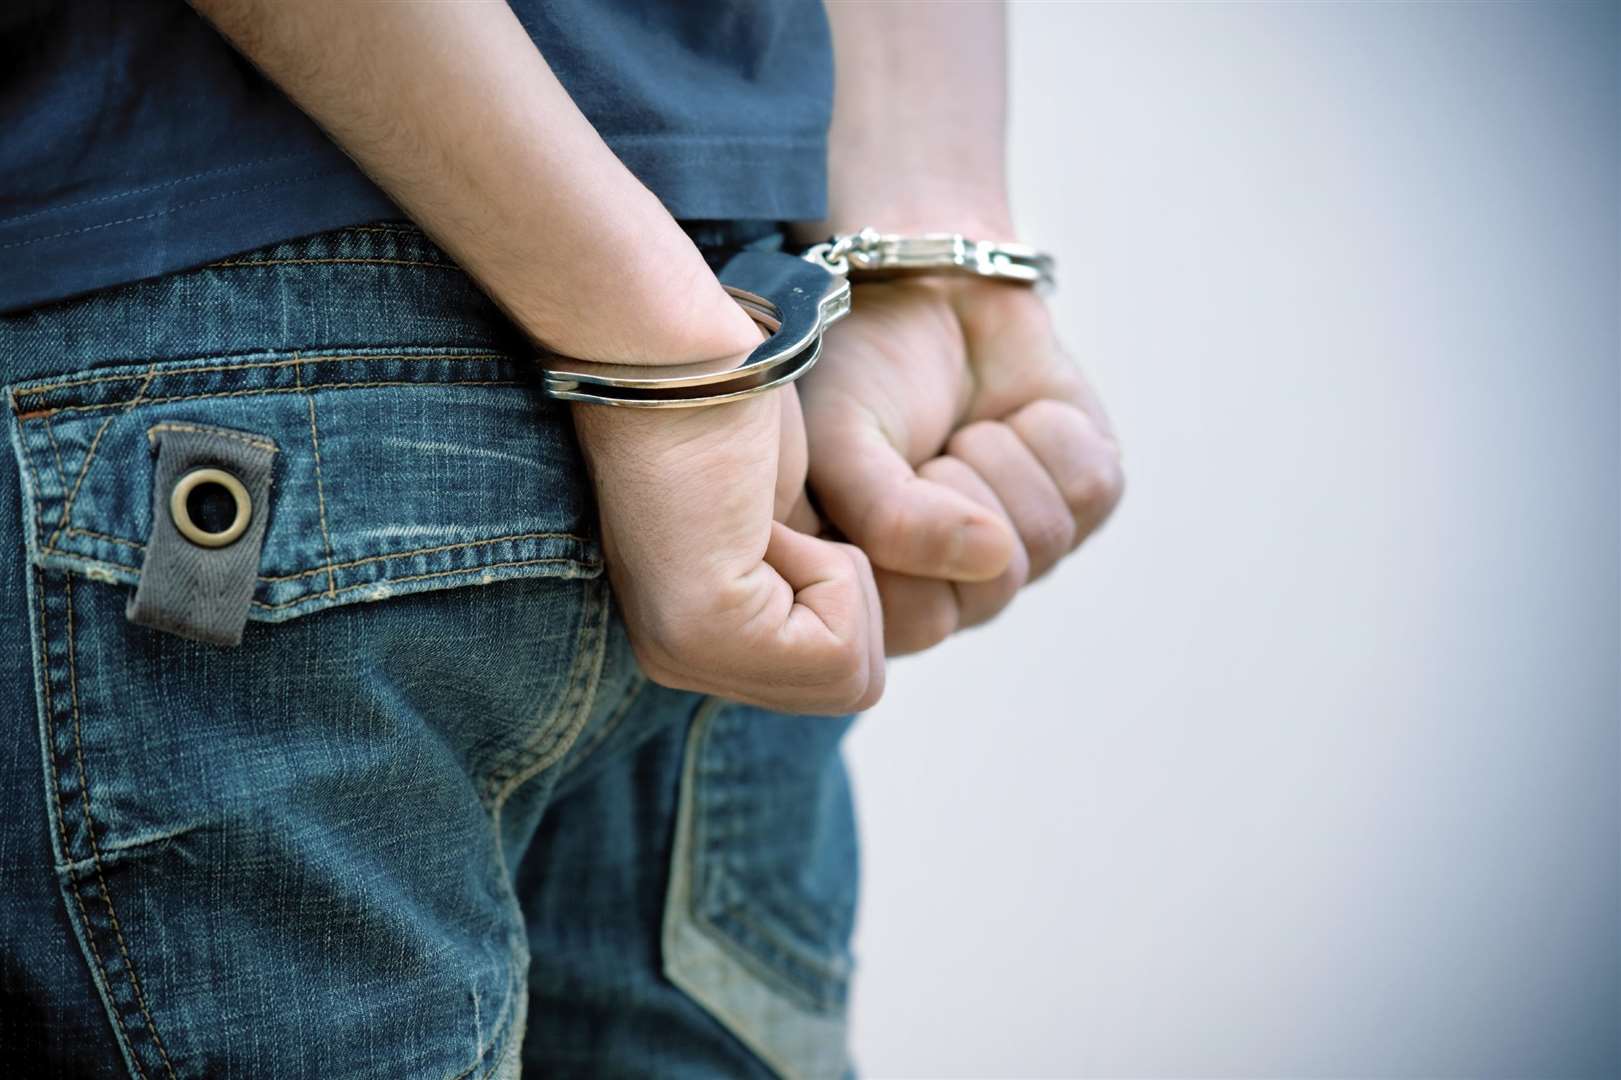 MUST CREDIT Picture: iStock.comKMG GROUP USE ONLYConditions of Use: Slug: badcells GM 090215Caption: Man in handcuffs. Stock pictureLocation: GravesendCategory: Human InterestByline: iStock.comContact Name: iStock.comContact Email: Contact Phone: 0203 227 2713Uploaded By: Nikki WHITECopyright: iStock.comOriginal Caption: FM3642007 (3881286)